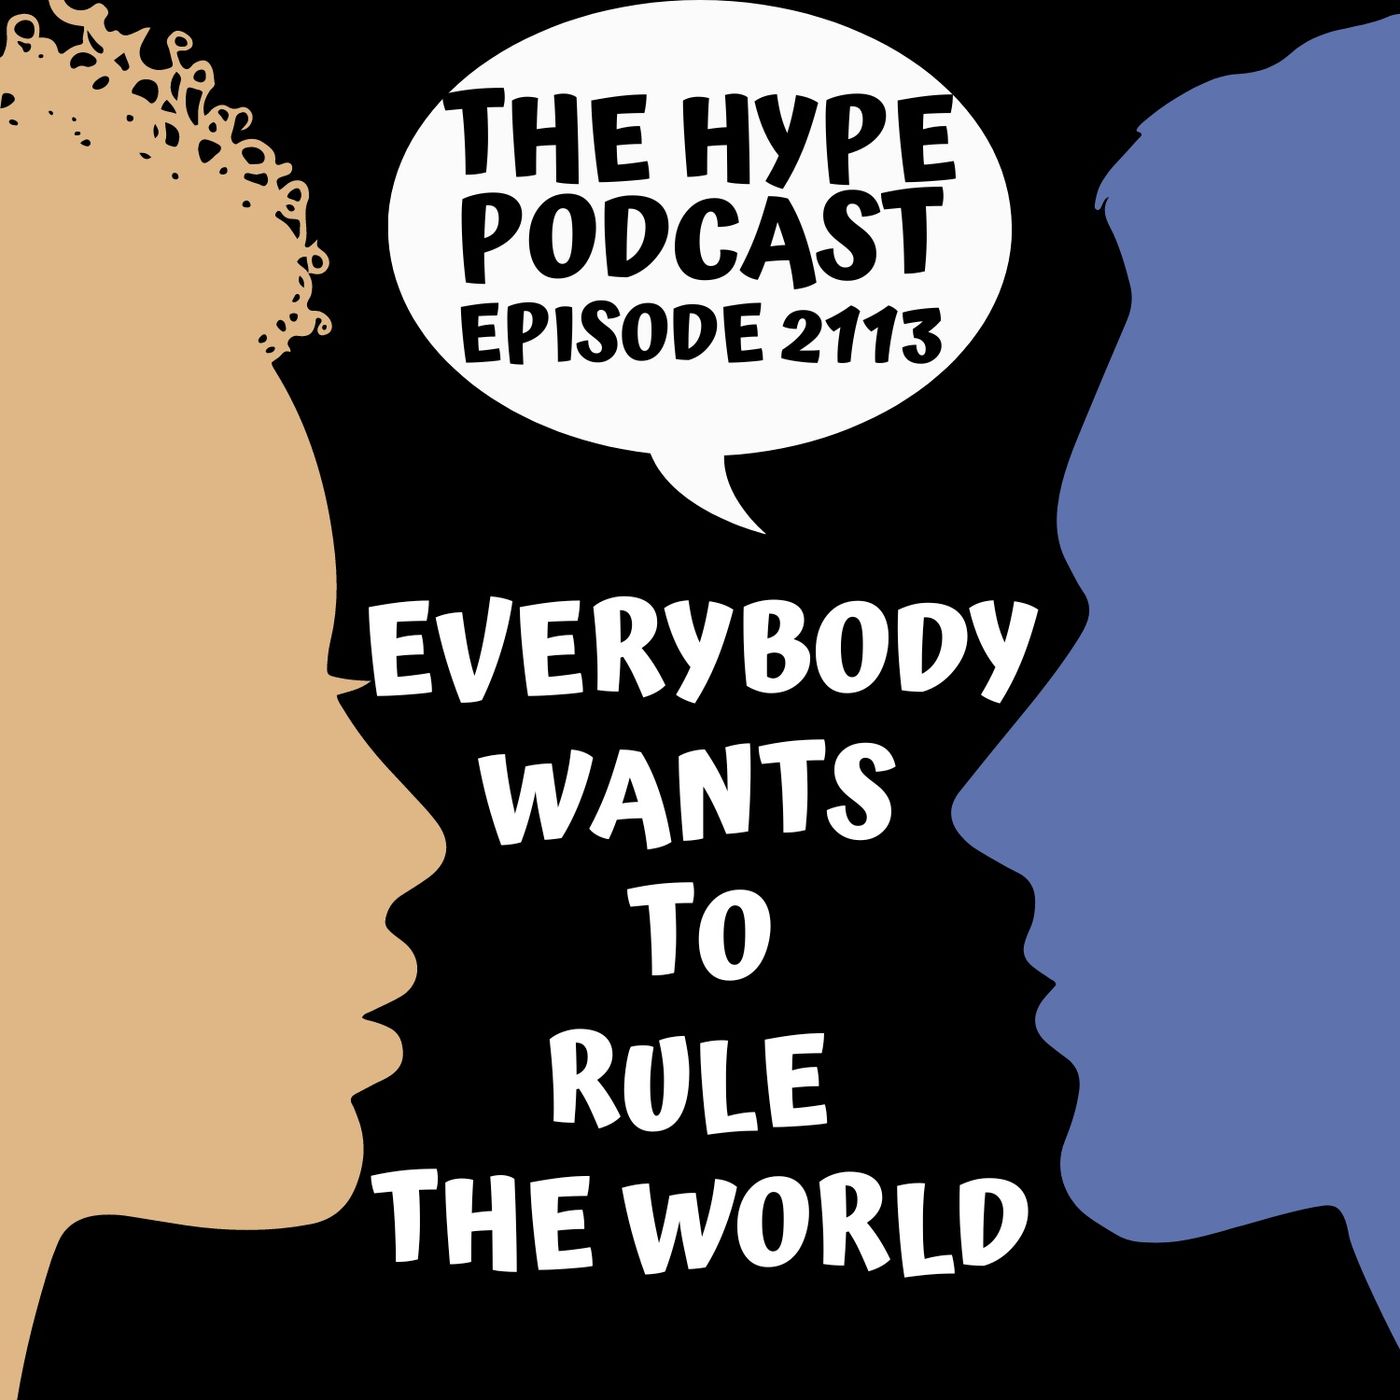 Episode 2113 Every Body Wants to Rule the World